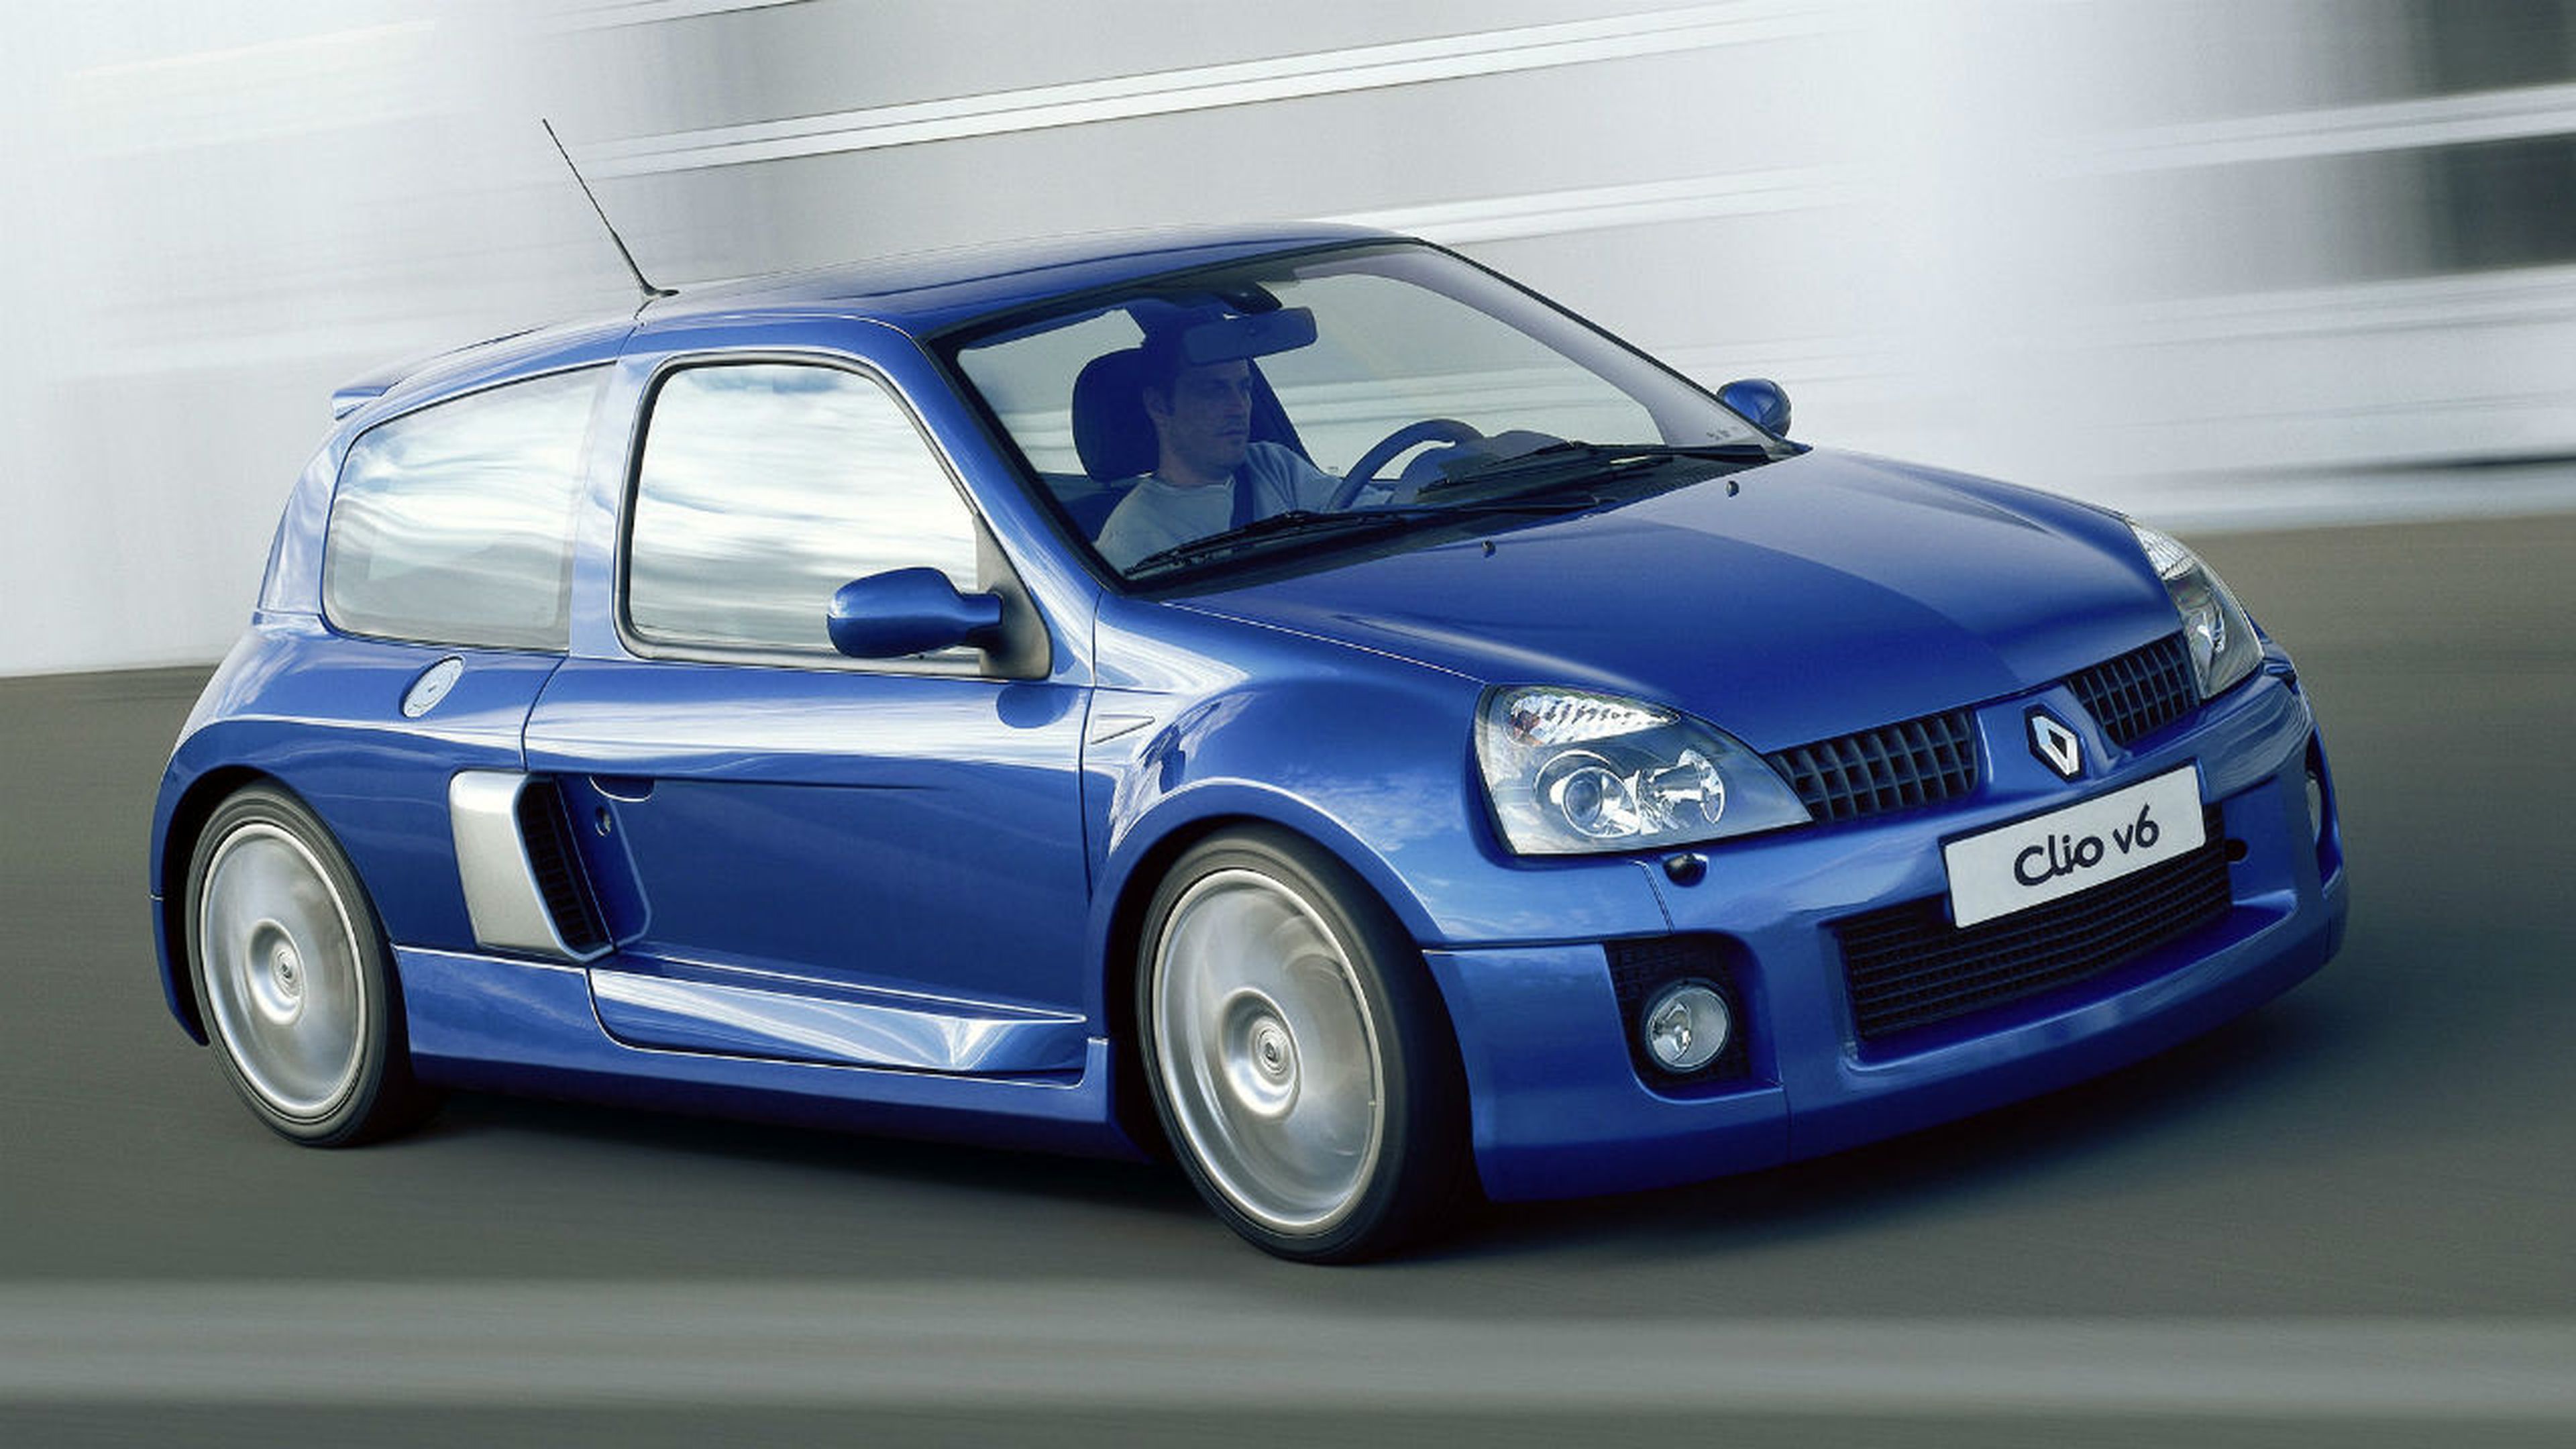 Renault Clio V6 Fase II